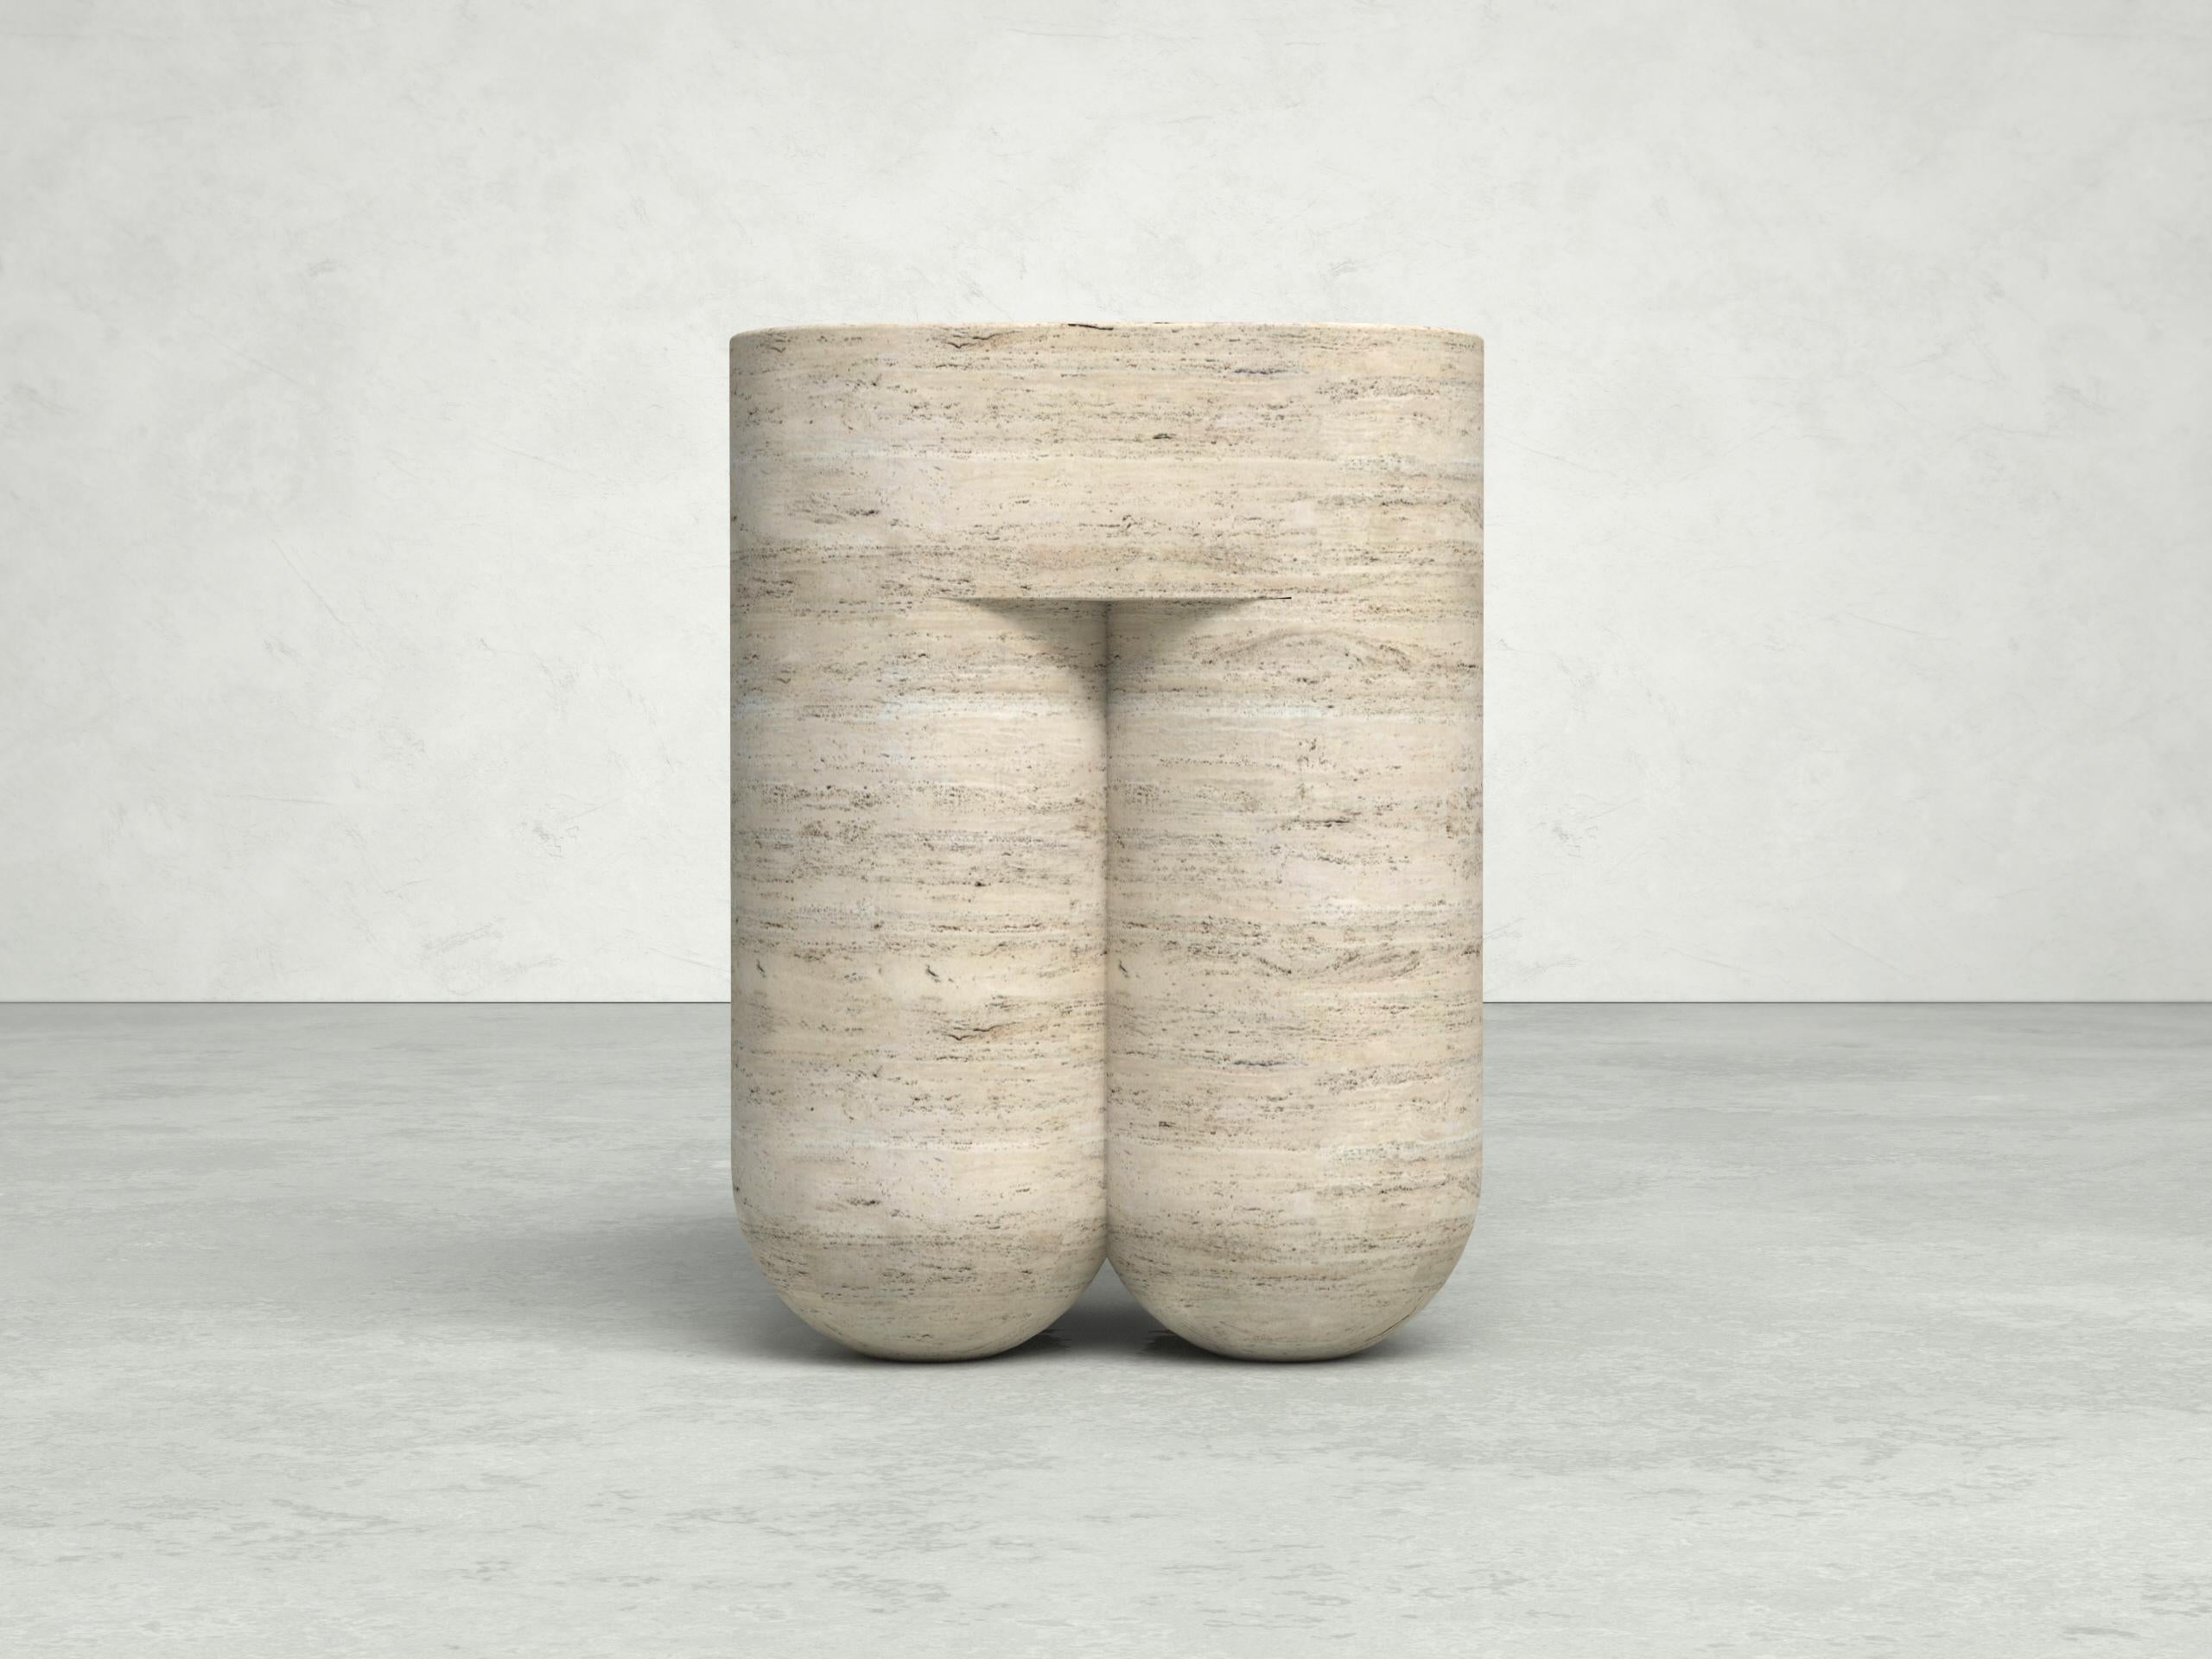 Chunky Classic Travertine Side Table & Stool by Dalmoto
Dimensions: D 34 x W 34 x H 46 cm.
Materials: Classic Travertine.

Available in different stone options. Please contact us. 

ETAMORPH is a NYC-based design boutique studio specializing in